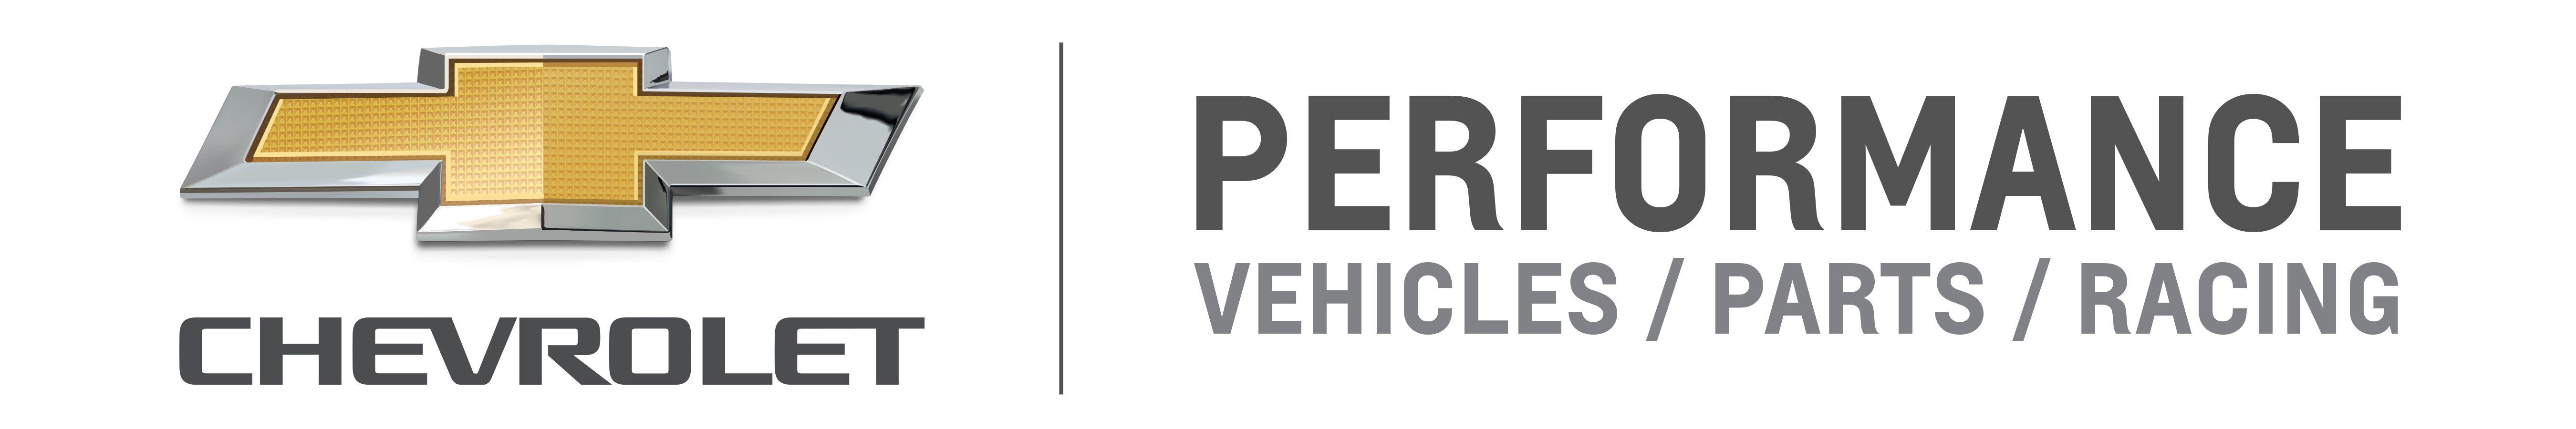 Chevrolet Performance Logo - General Motors Official Licensed Product Statement